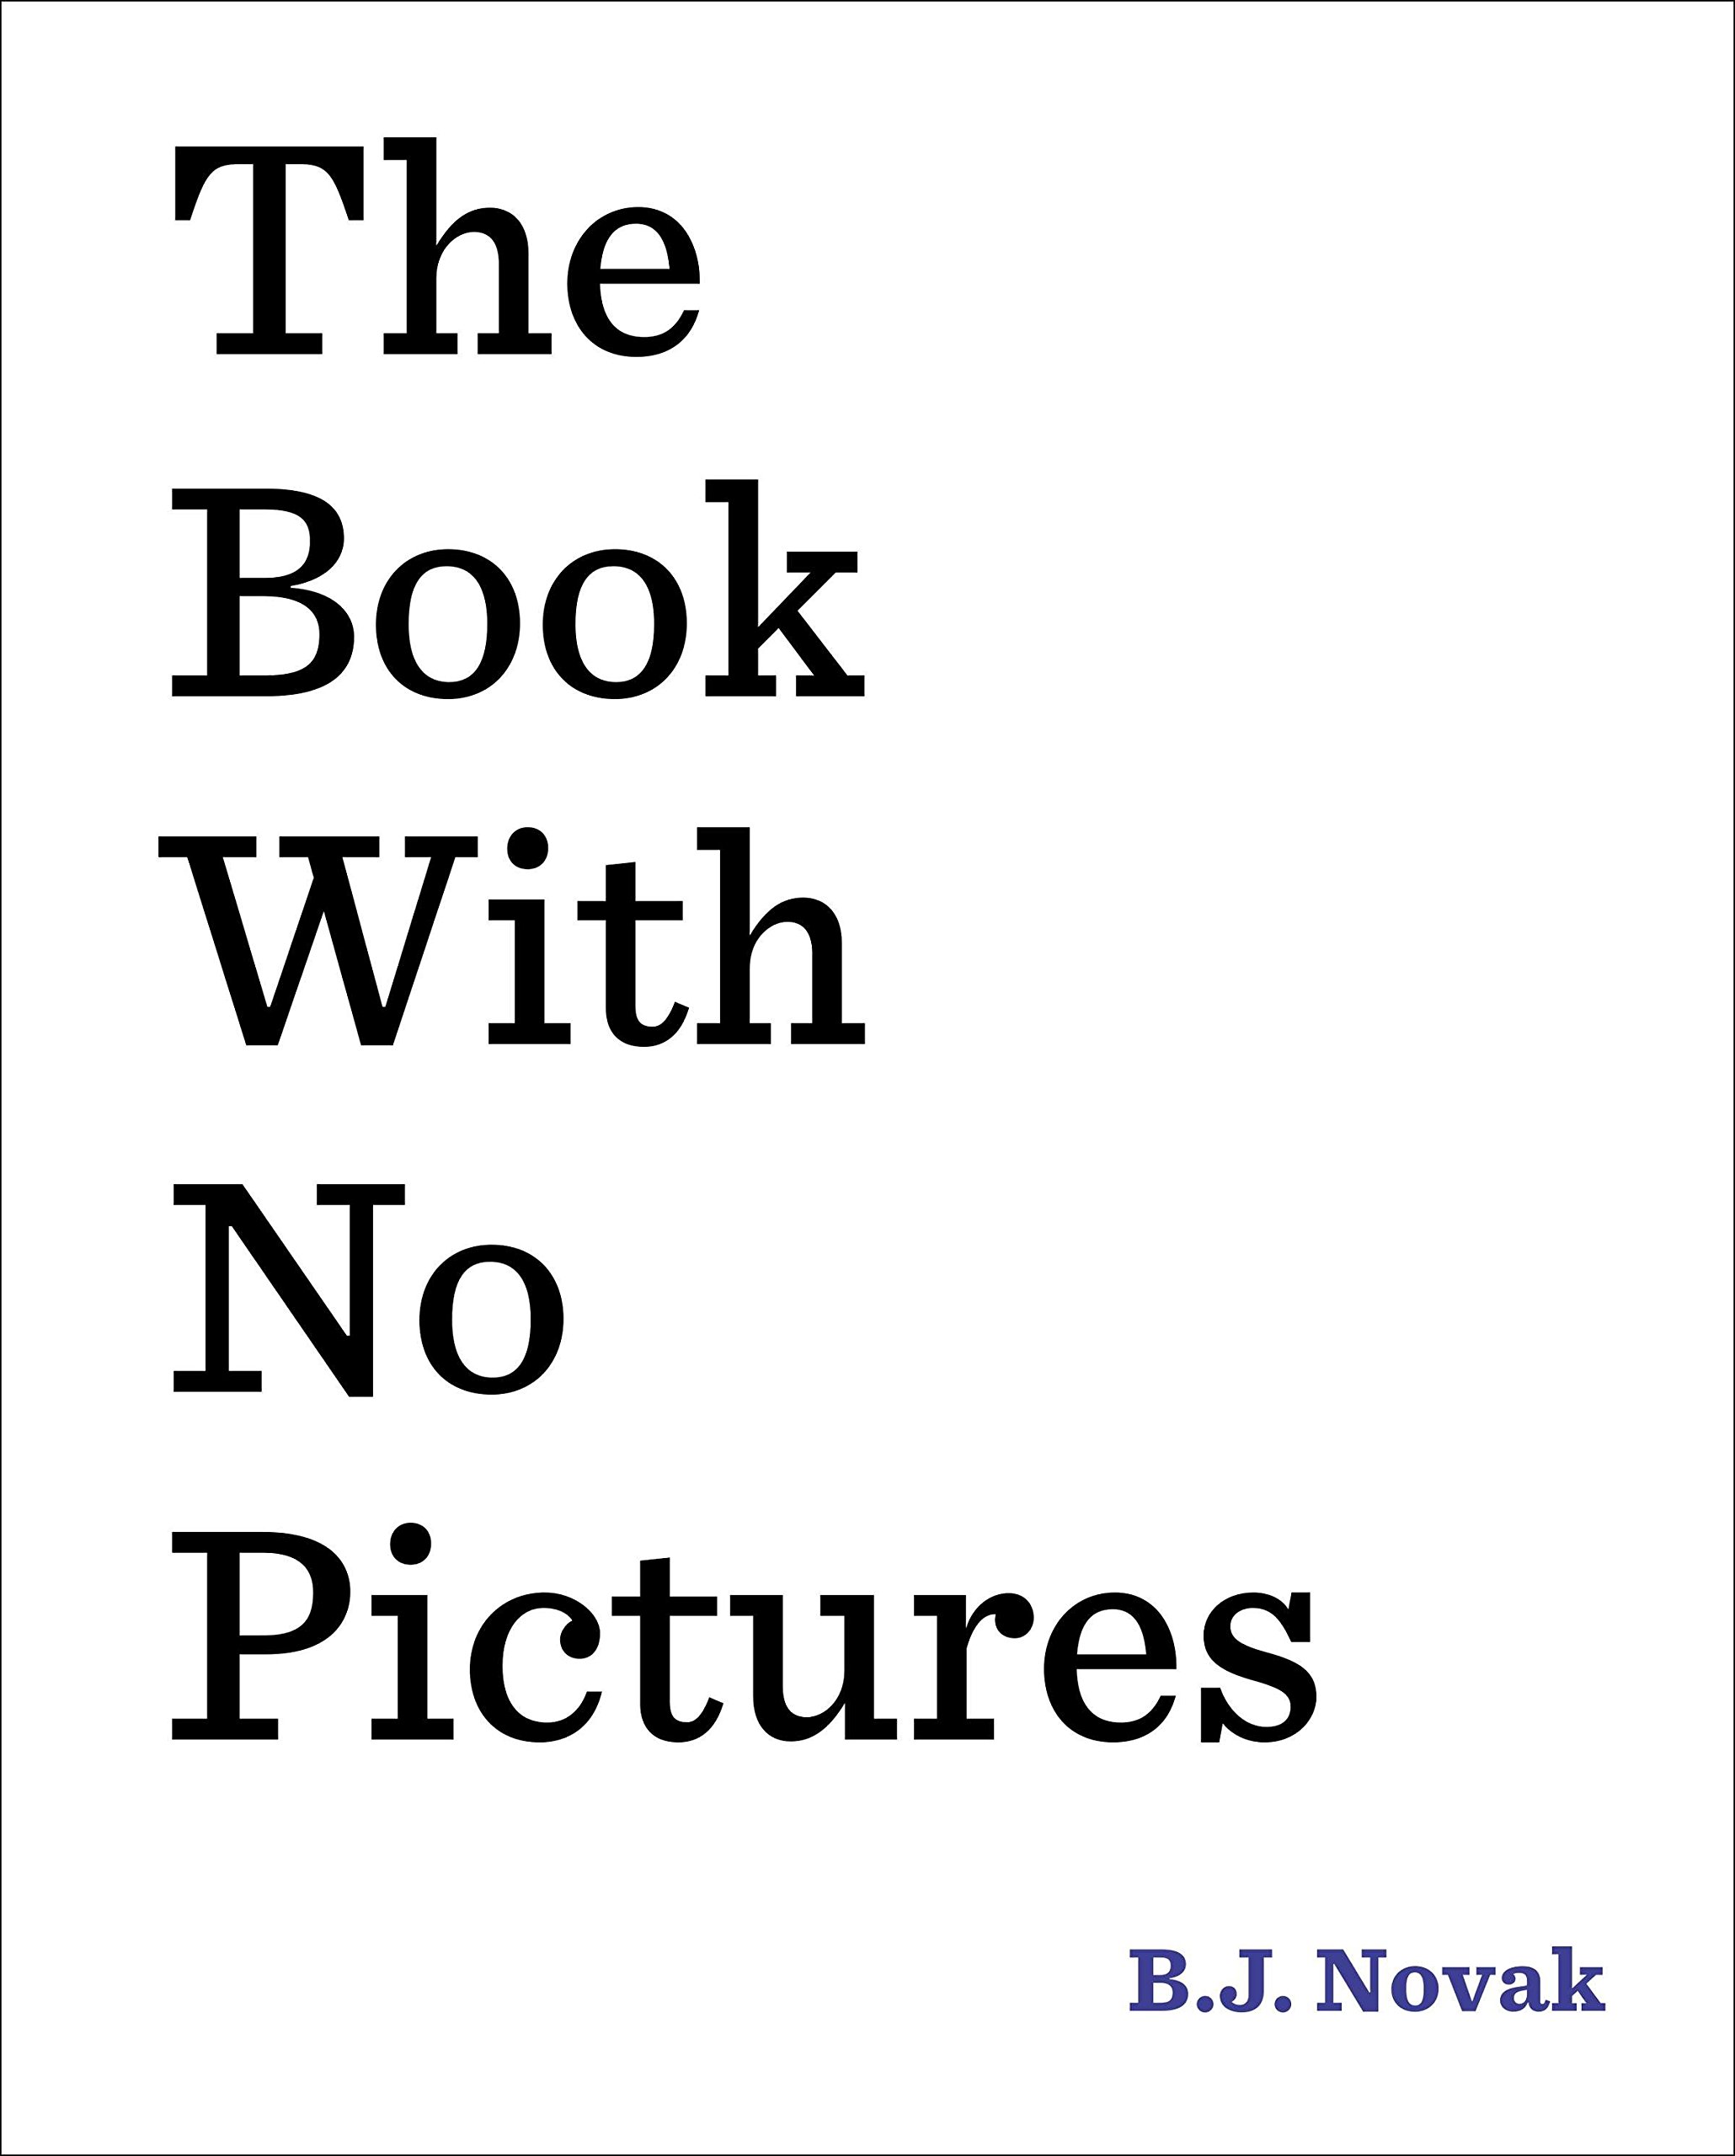 cover of the book with no pictures